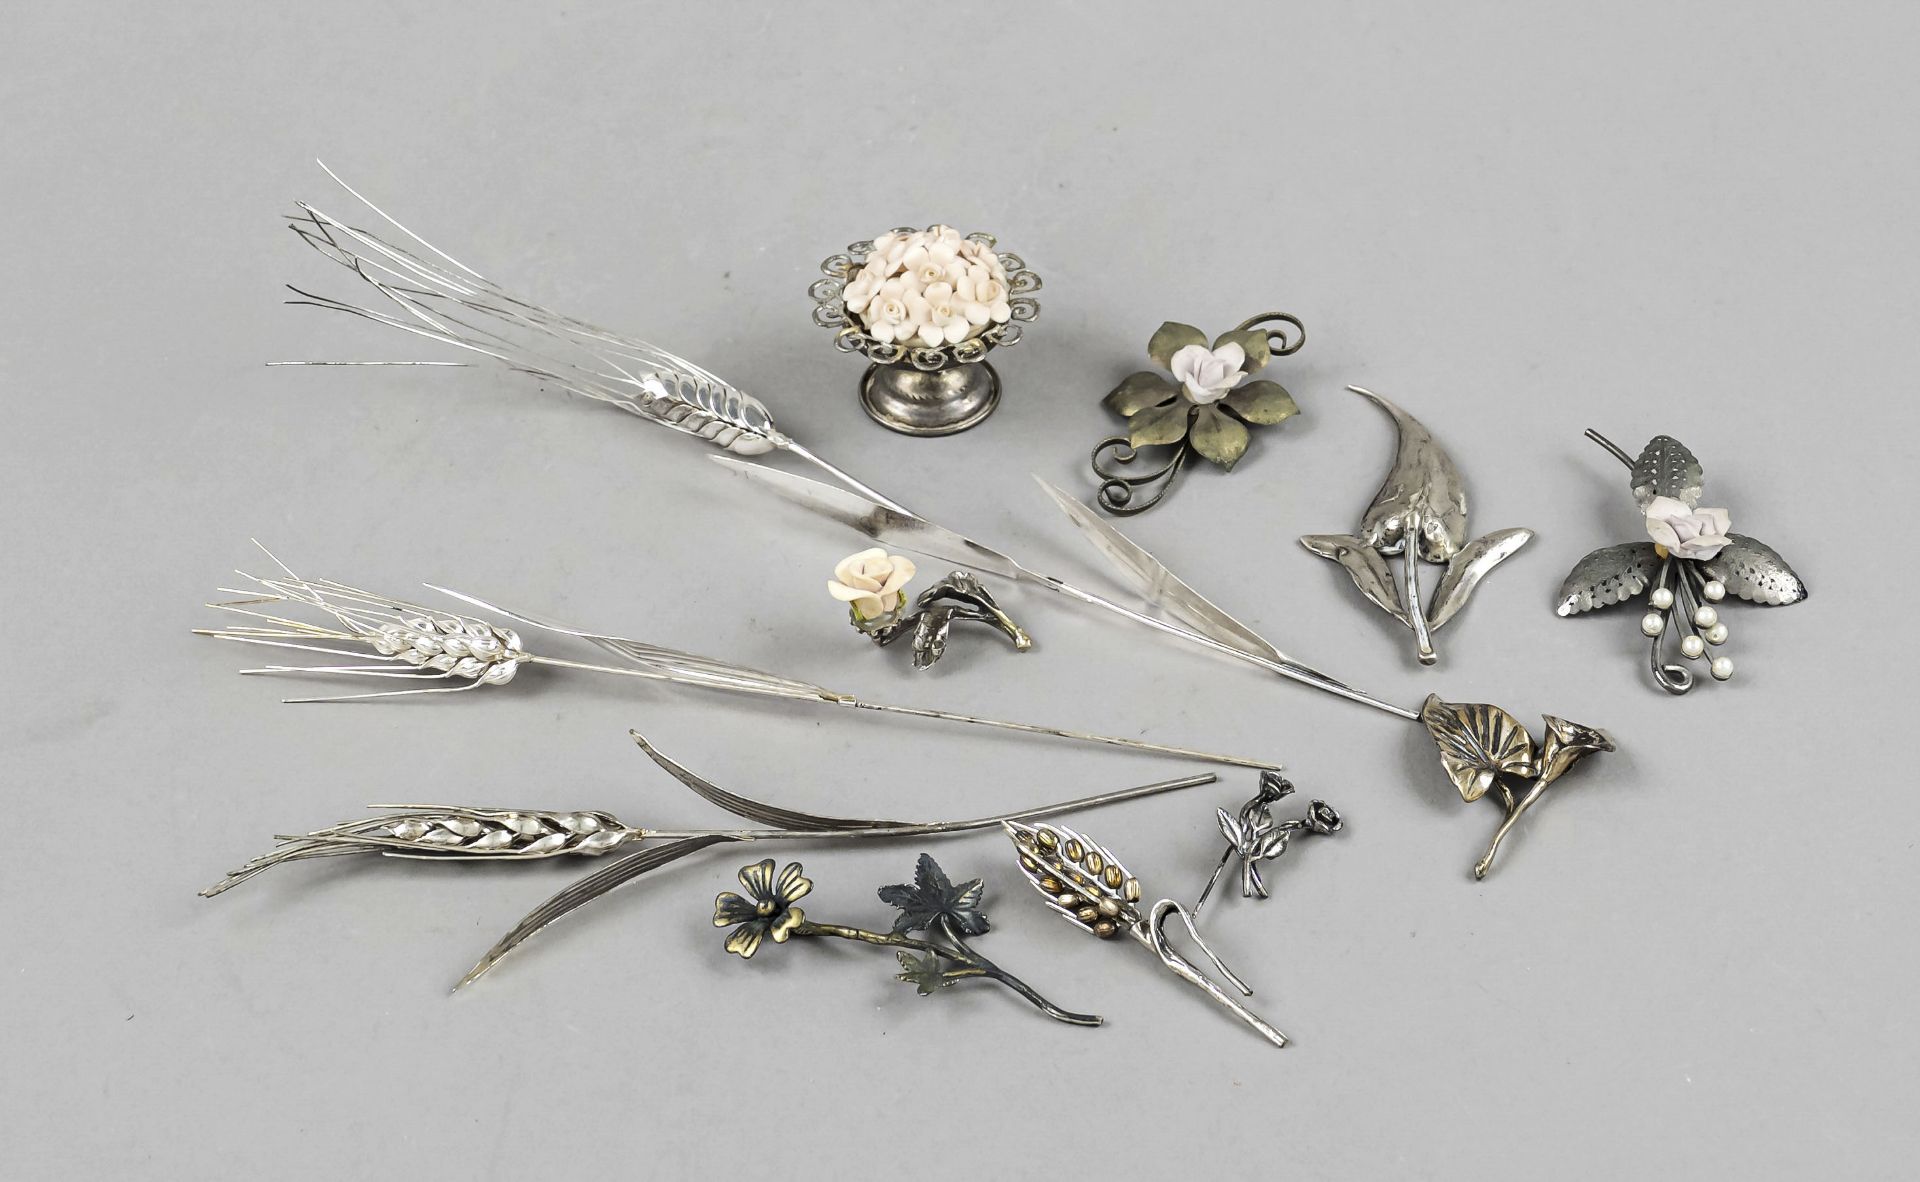 Nine miniature flowers and ears of corn, mainly Italy, 2nd half of the 20th century, silver of